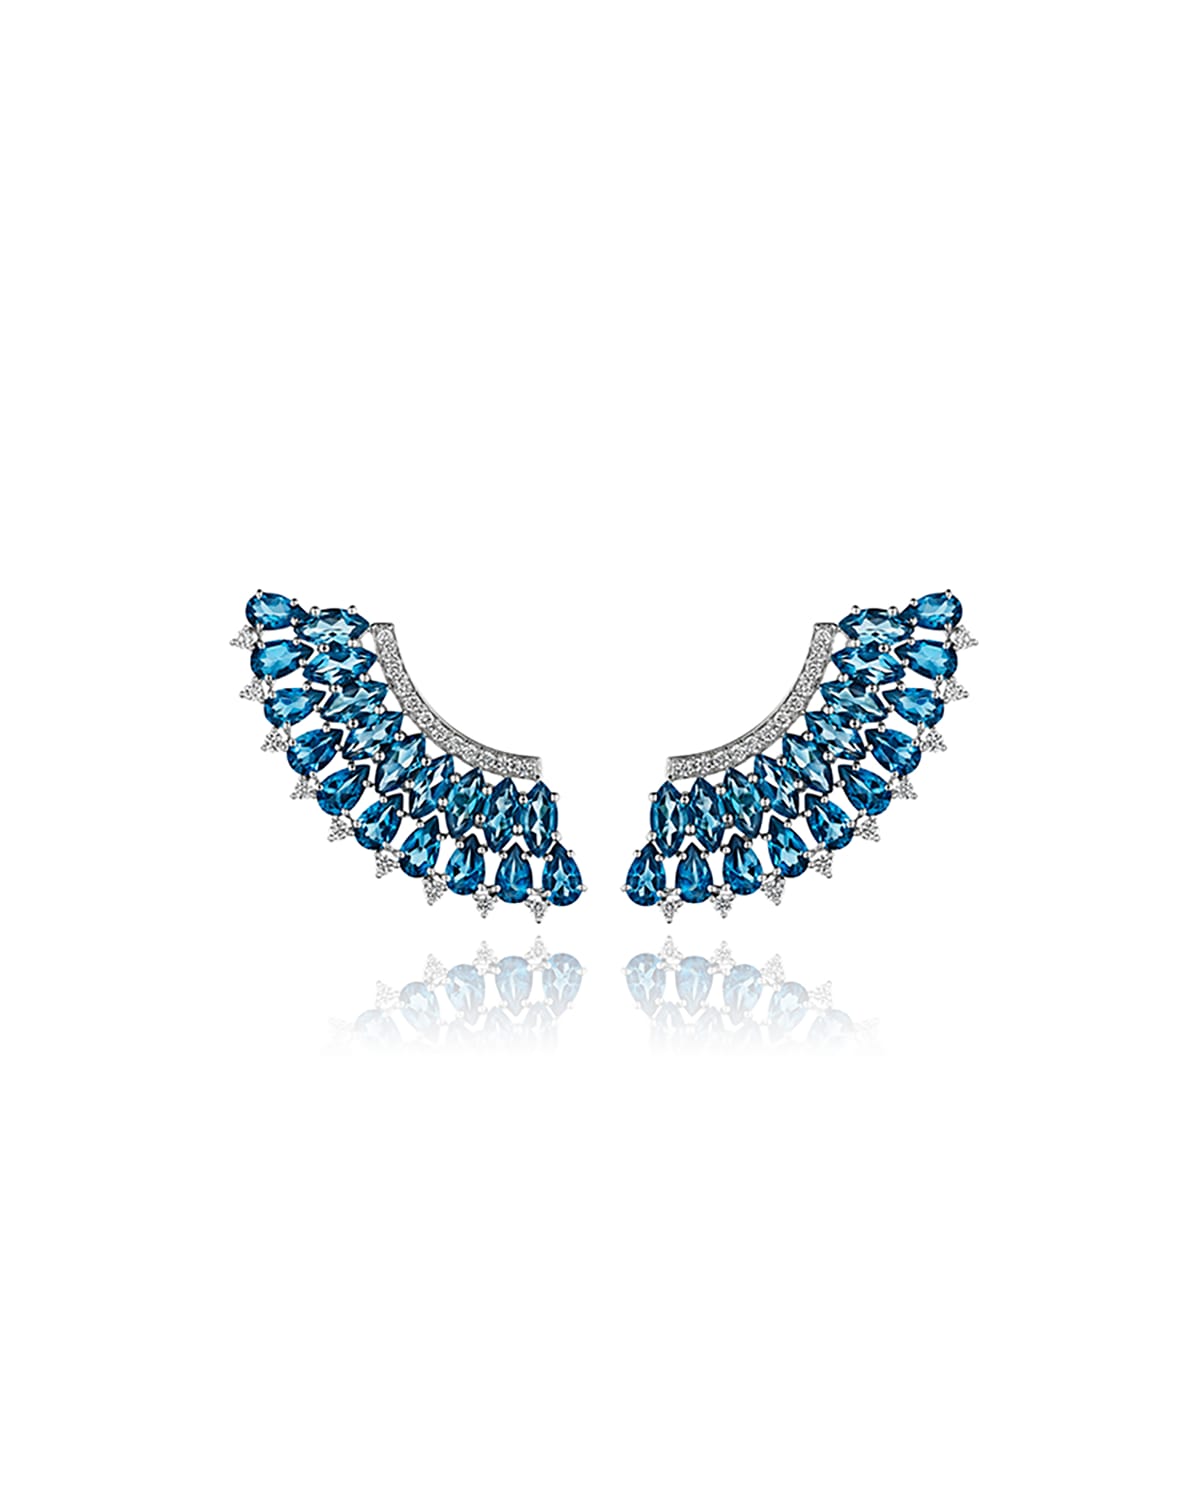 Mirage 18k White Gold Blue Topaz and Diamond Pave Earrings